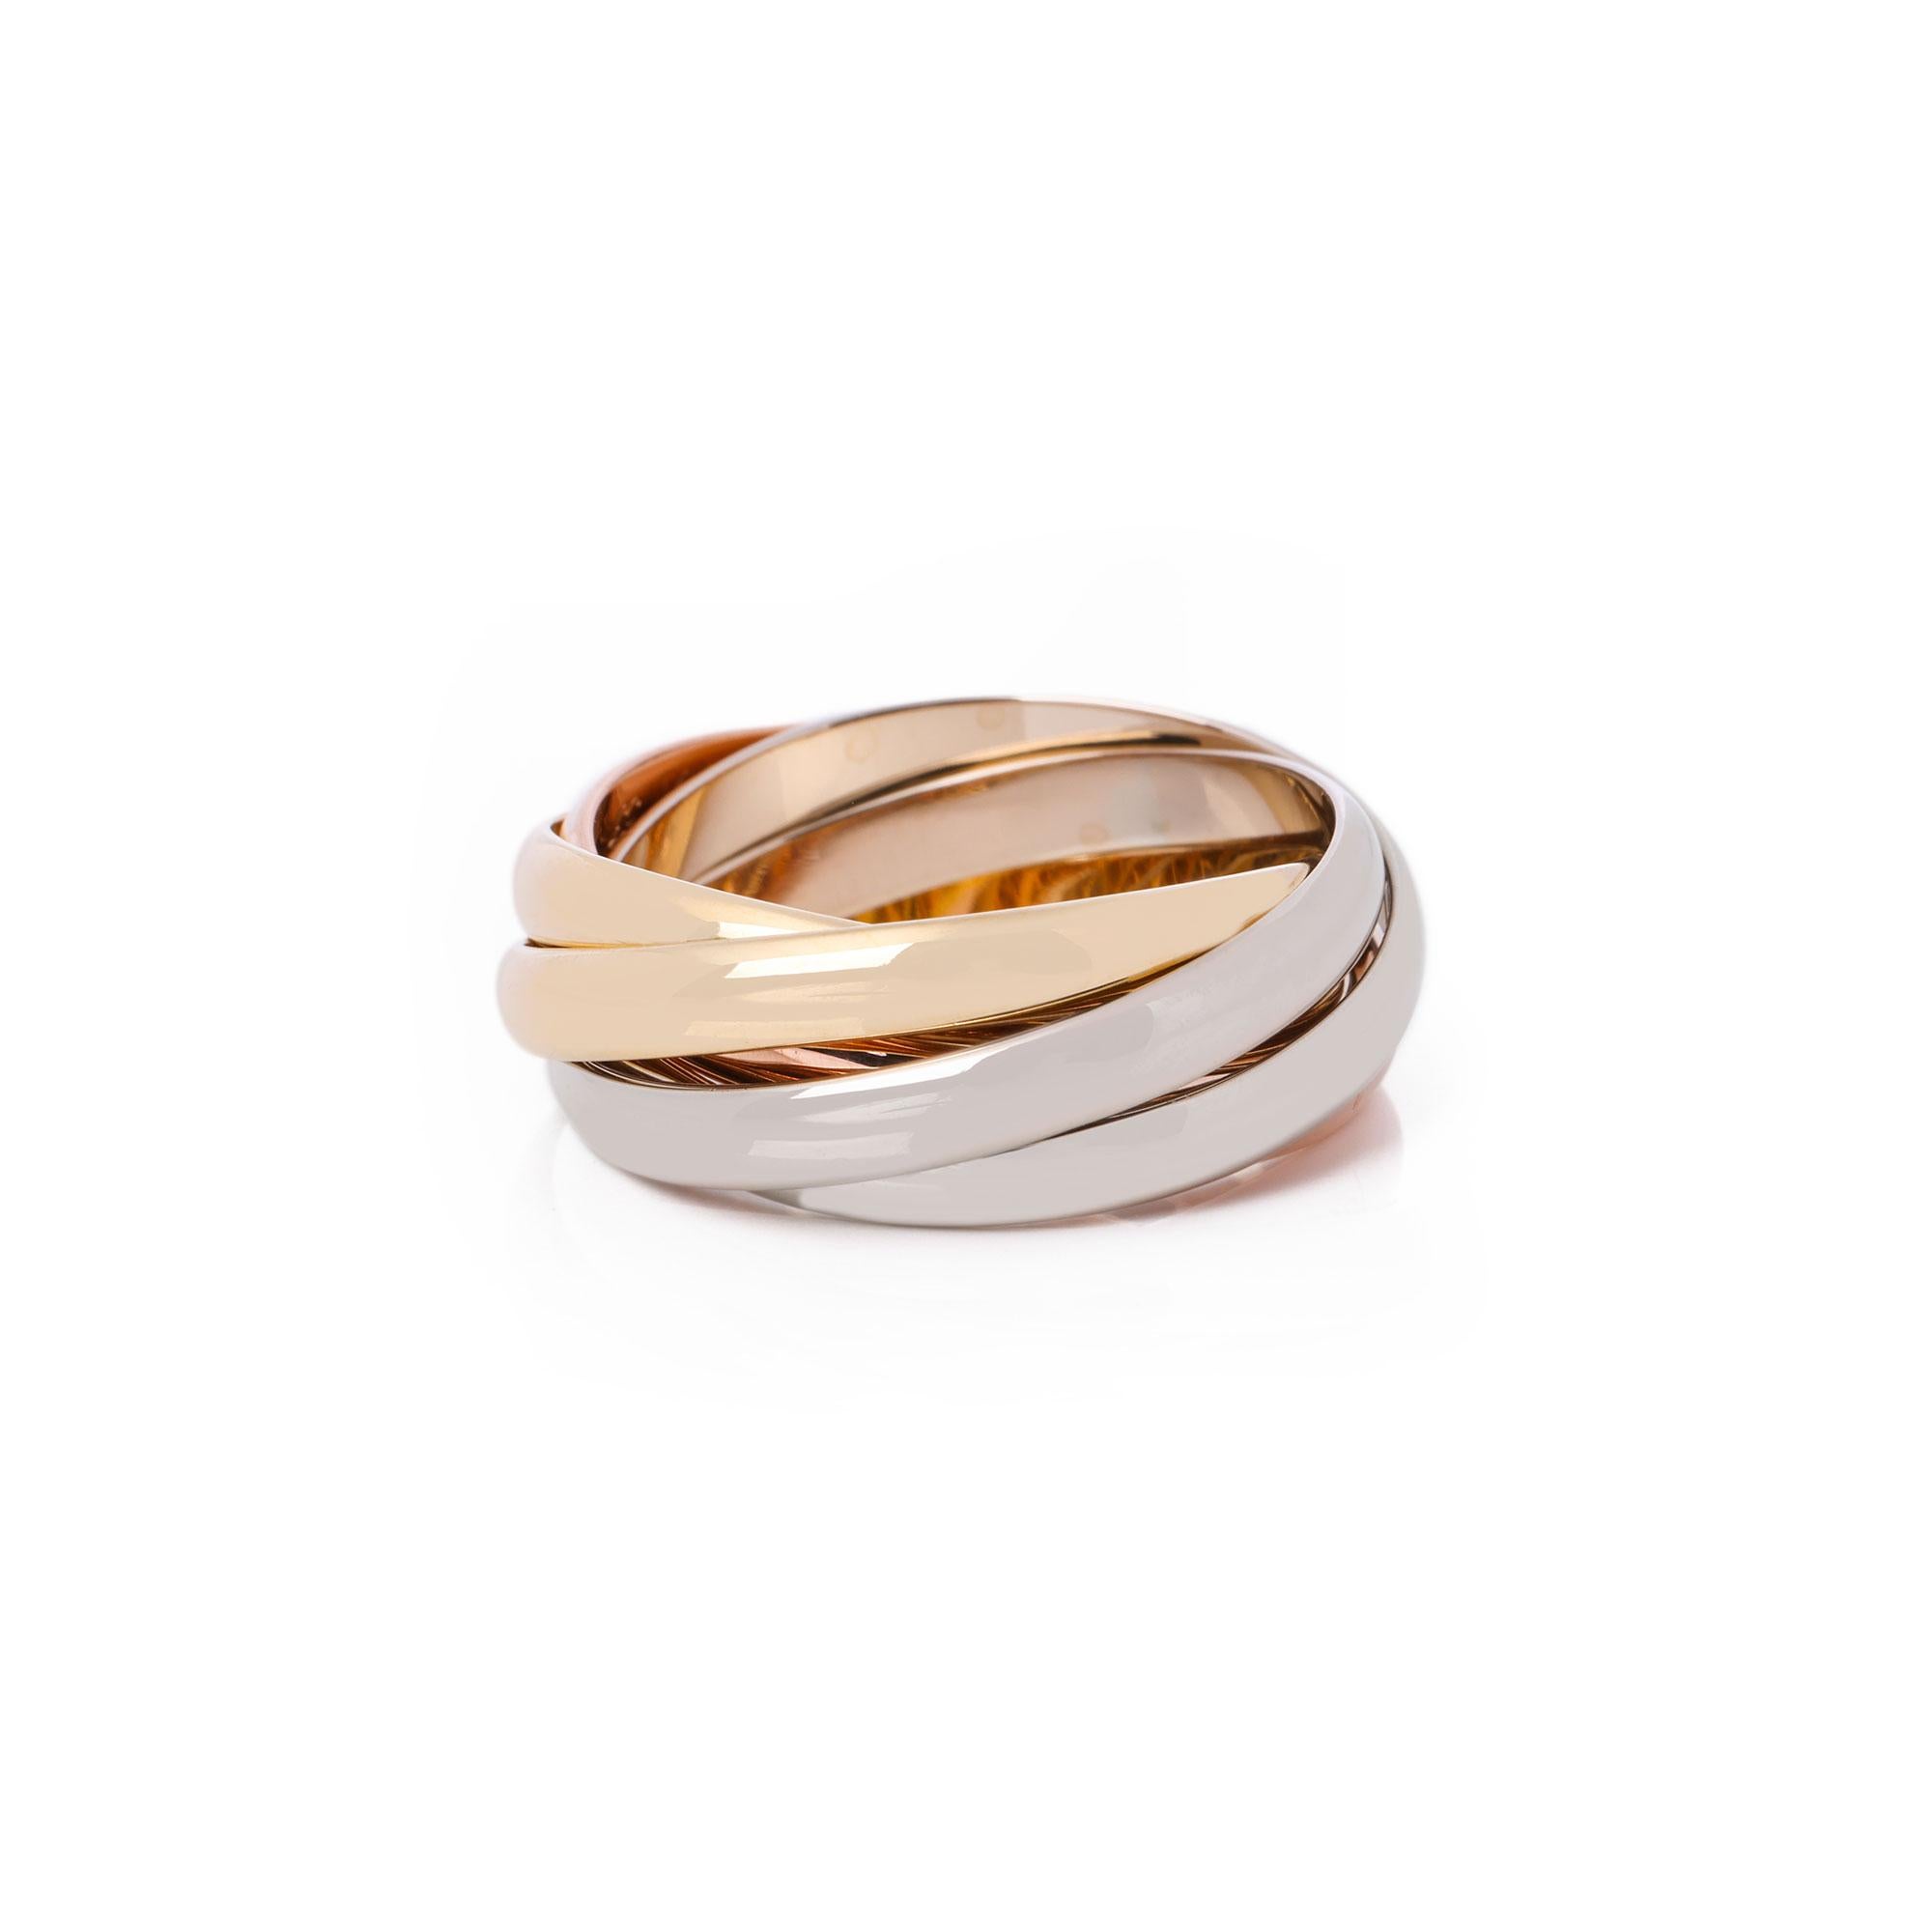 This ring by Cartier is from their Les Must De Cartier Trinity collection and features five 18k yellow, white and rose gold interlinking bands. This ring cannot be re sized. Complete with a Xupes presentation box. Our Xupes reference is J756 should